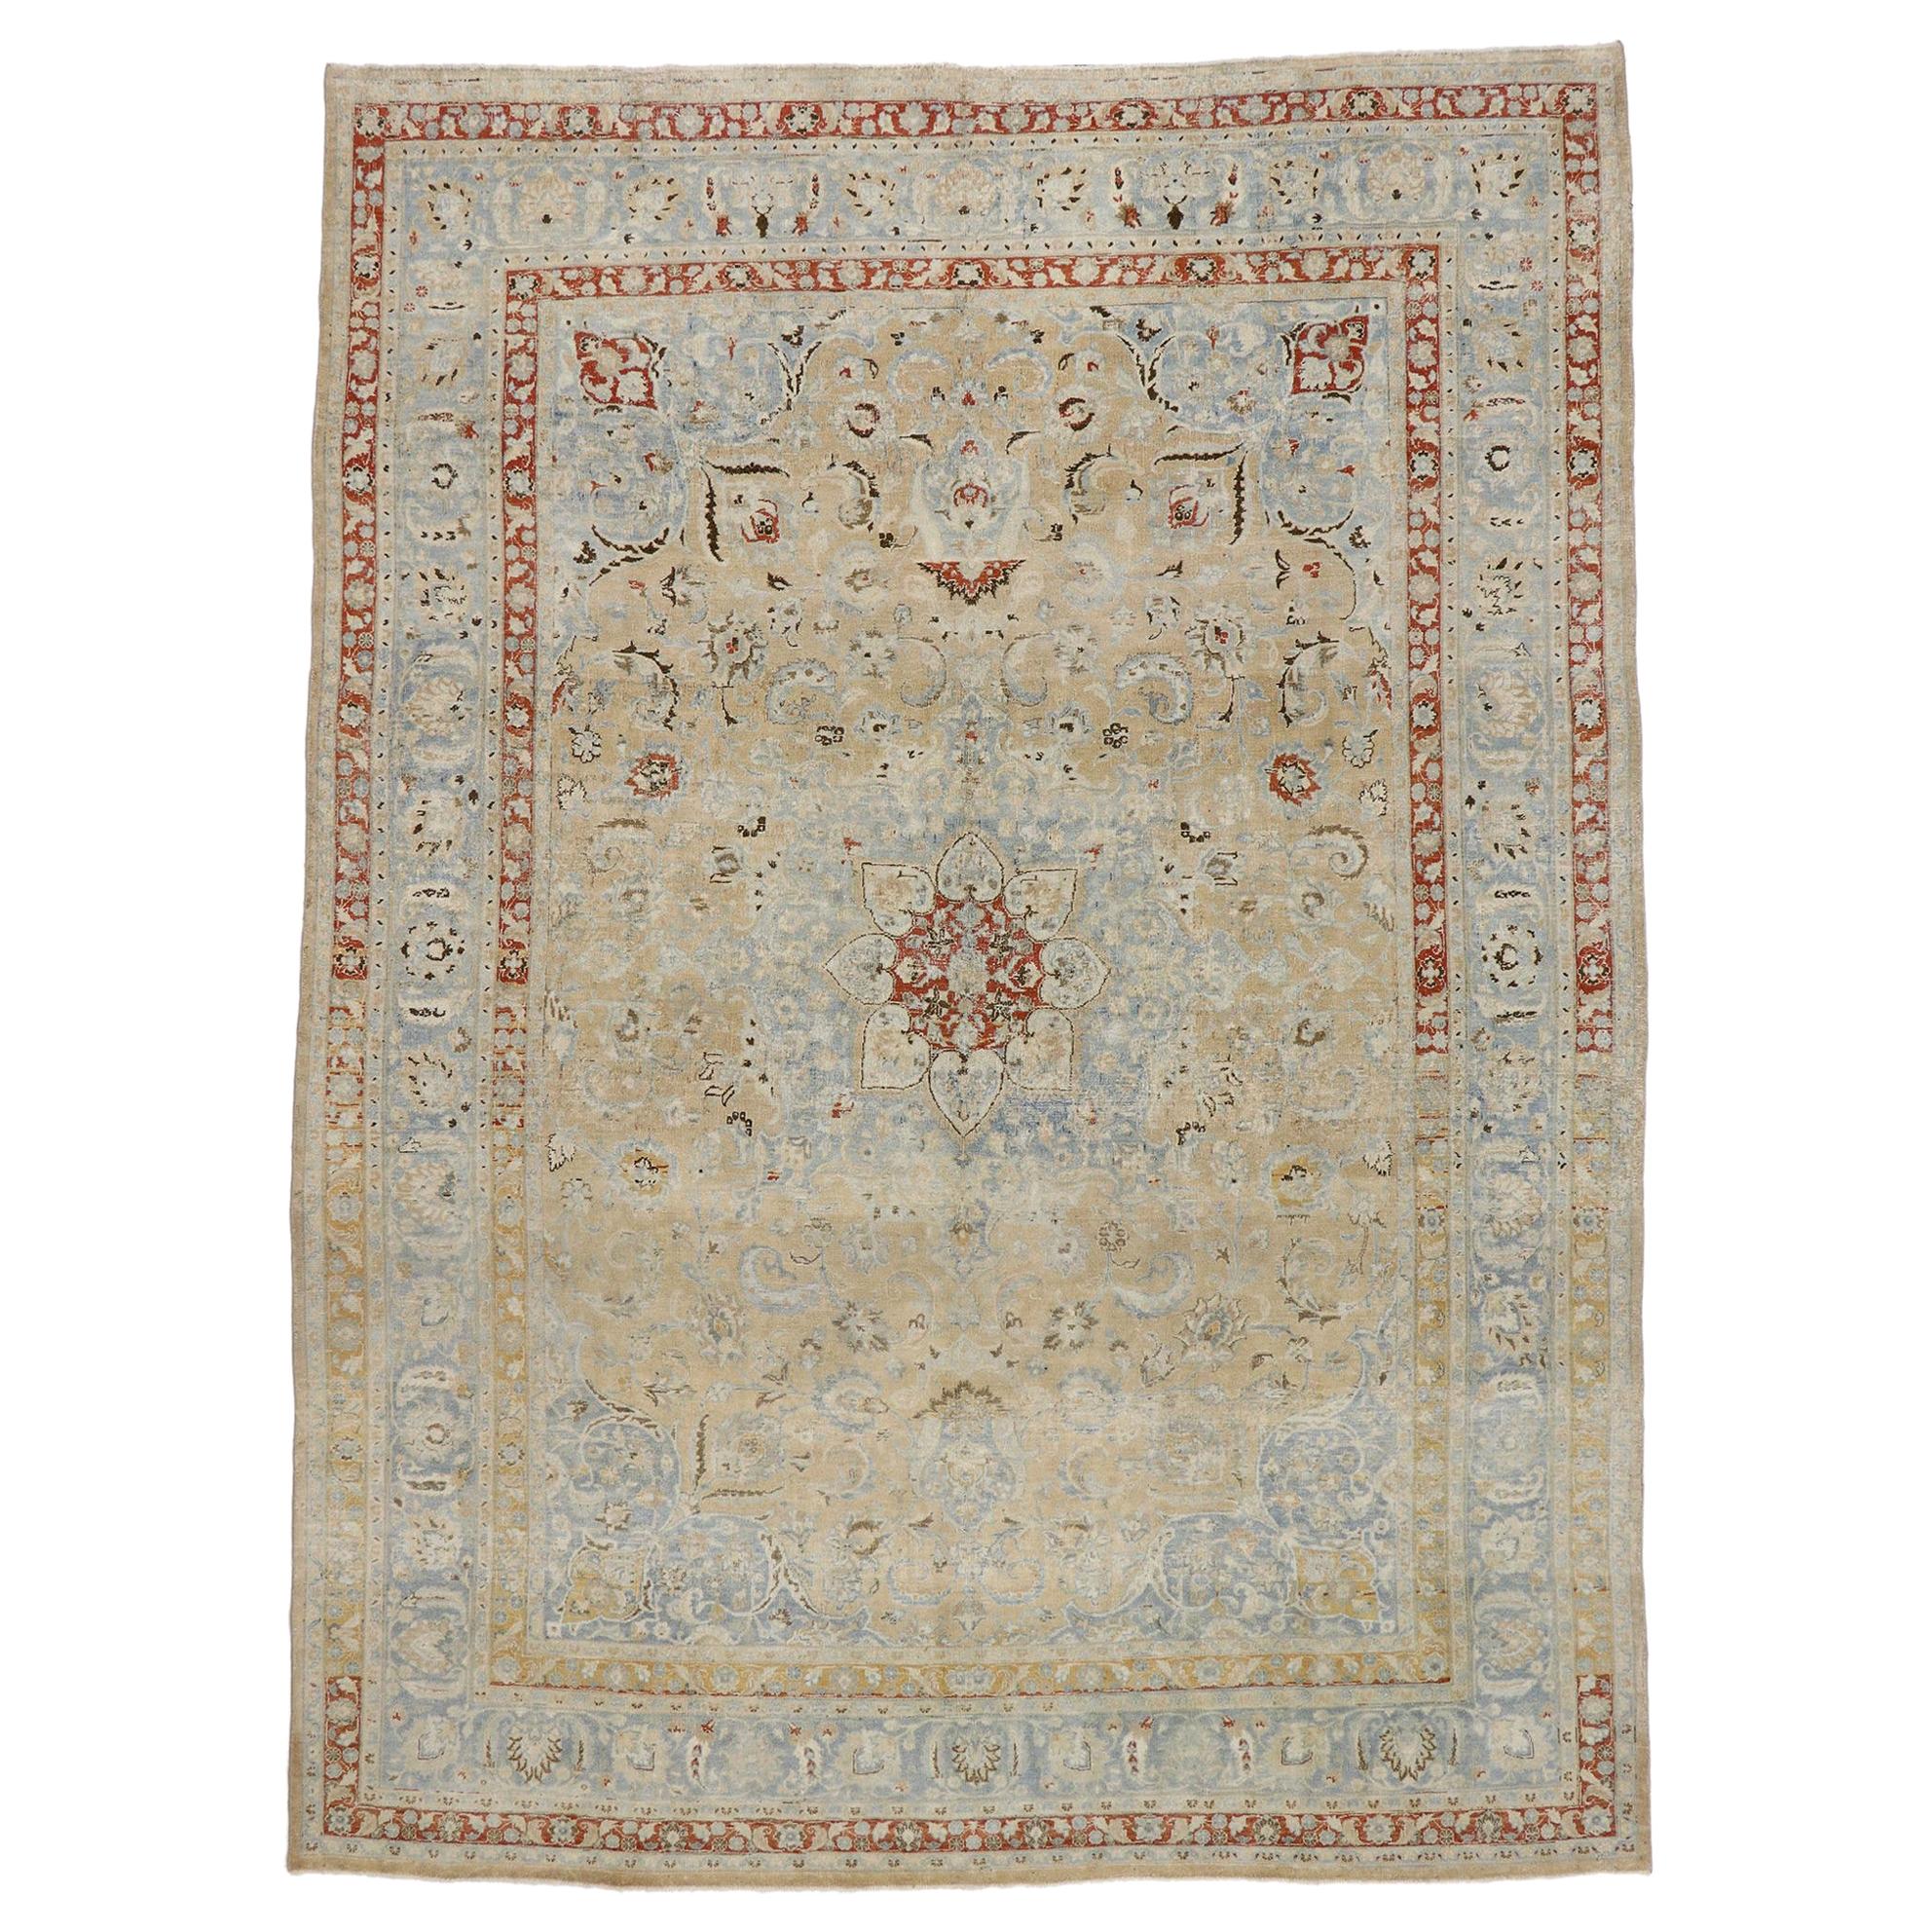 Distressed Antique Persian Khorassan Rug with Rustic Cotswold Cottage Style